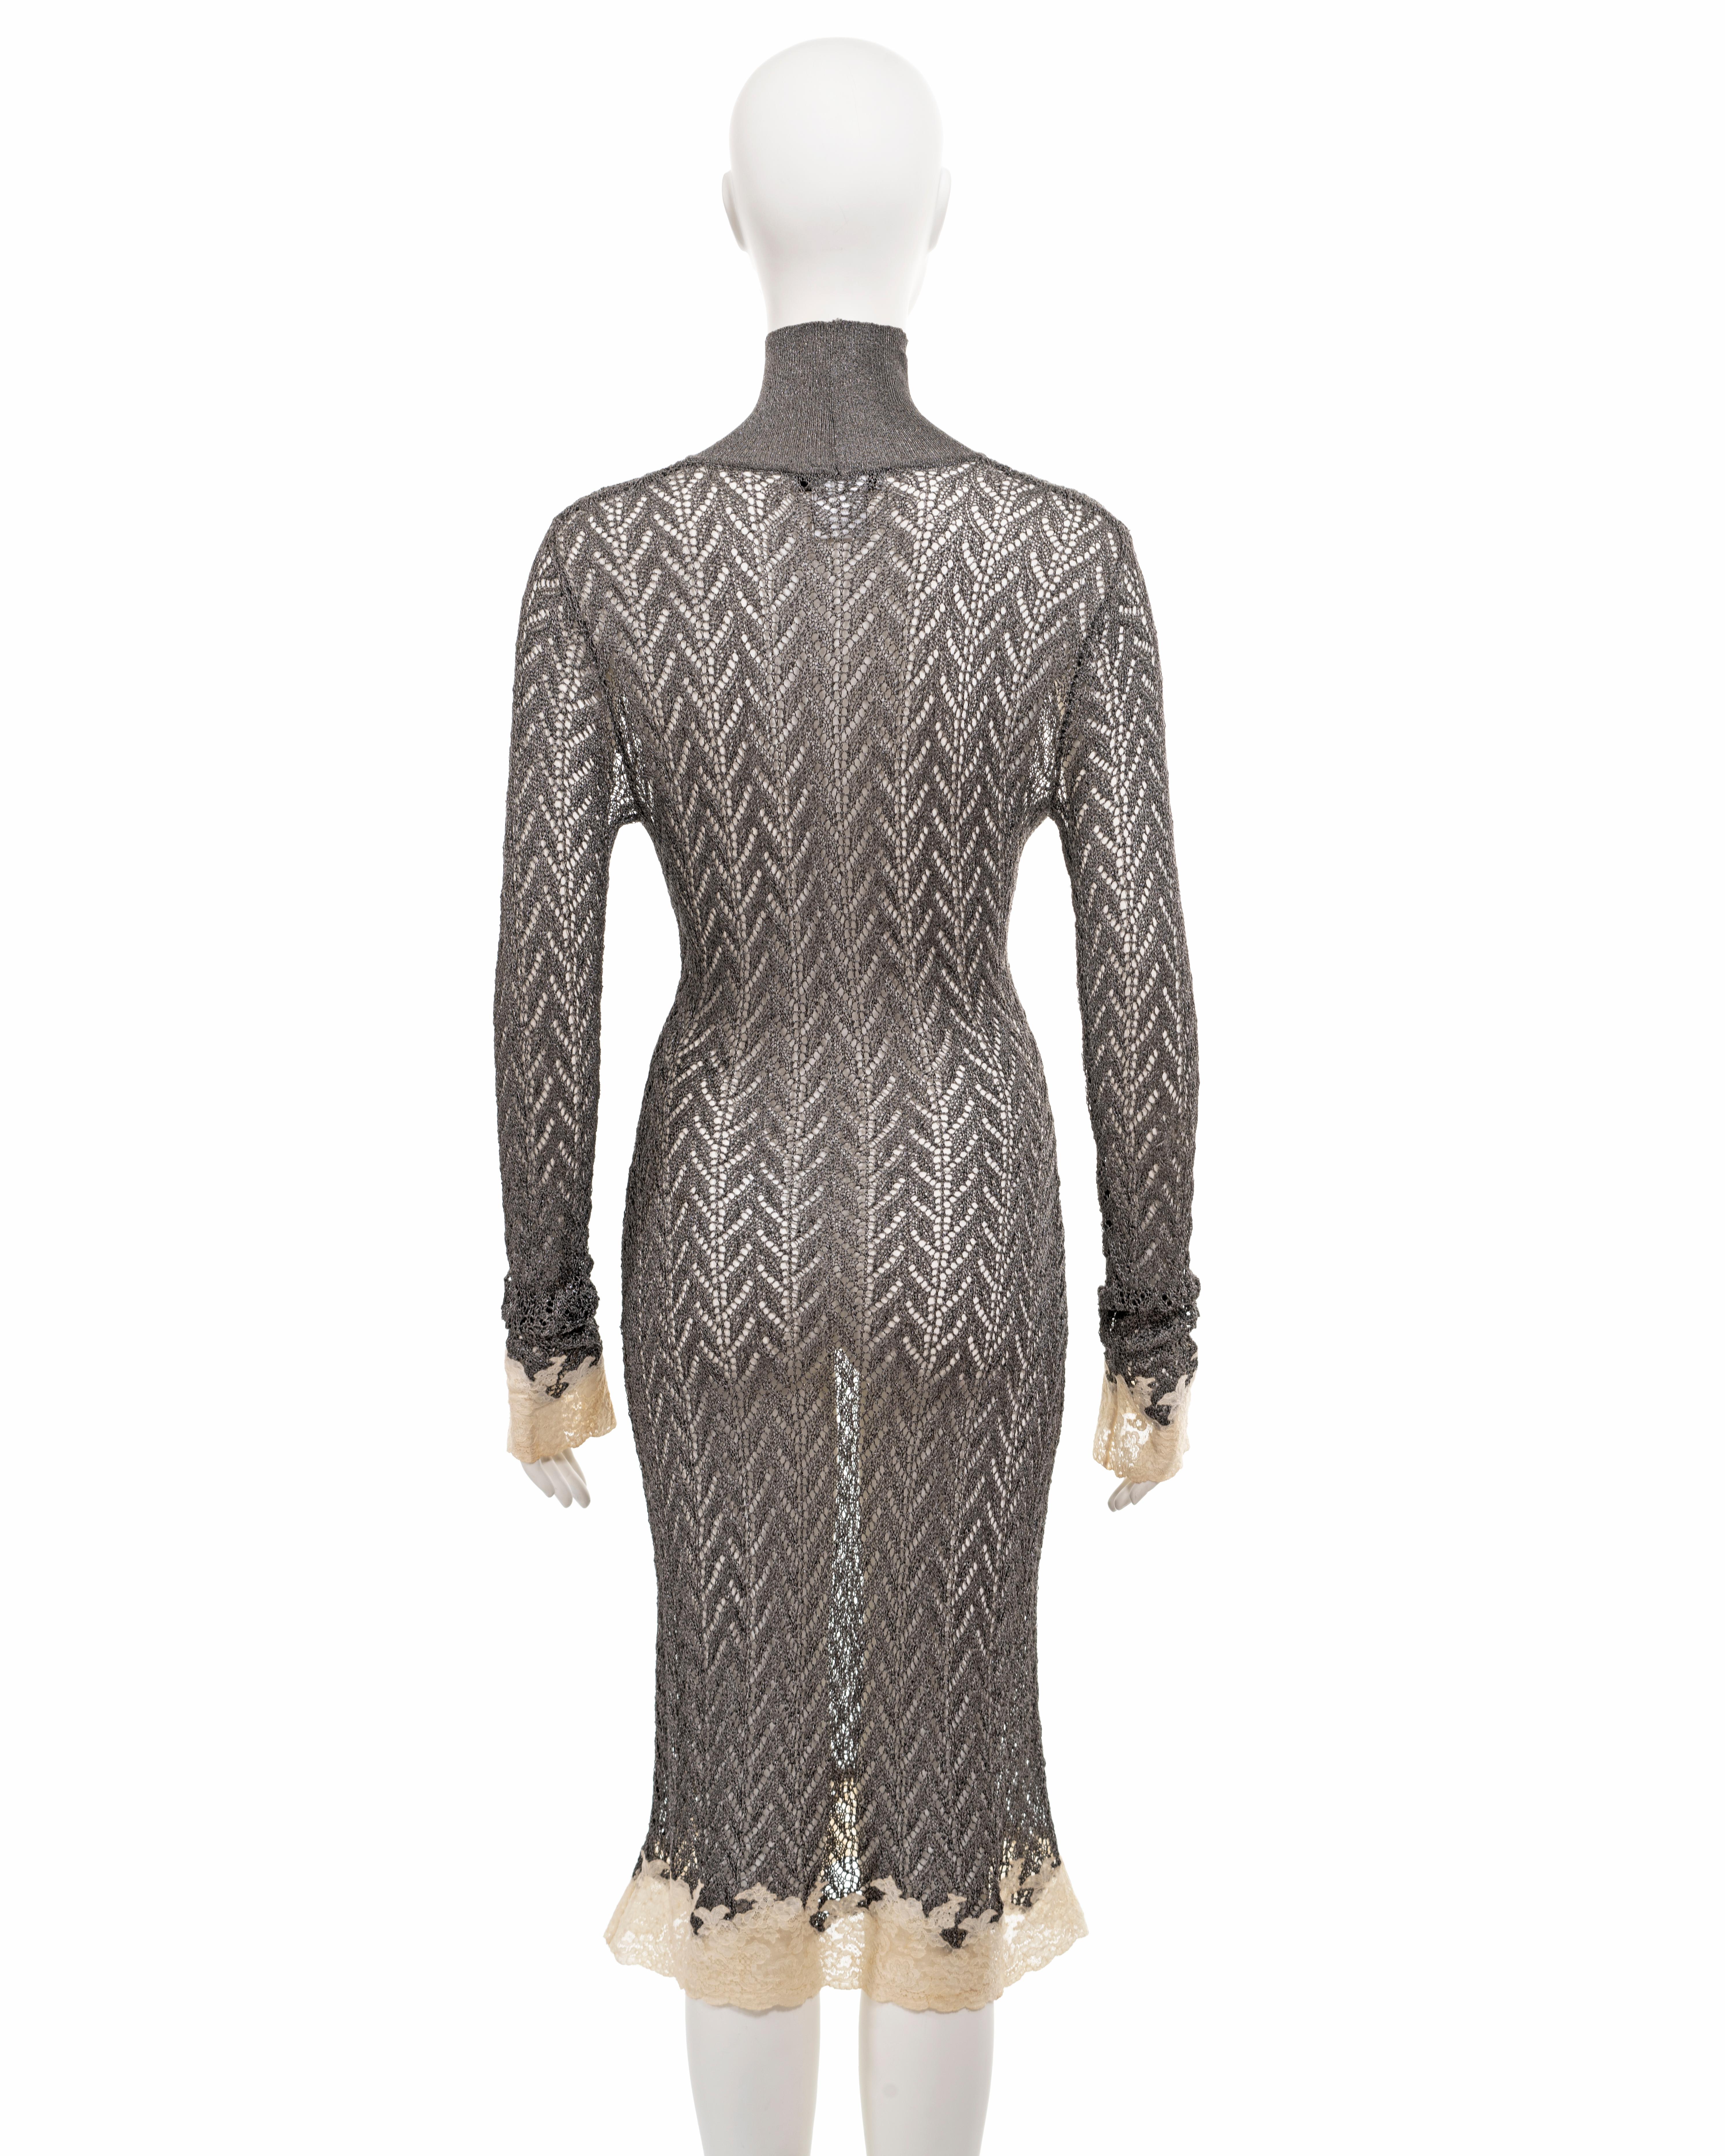 Christian Dior by John Galliano silver open-knit dress with lace trim, fw 1998 For Sale 4